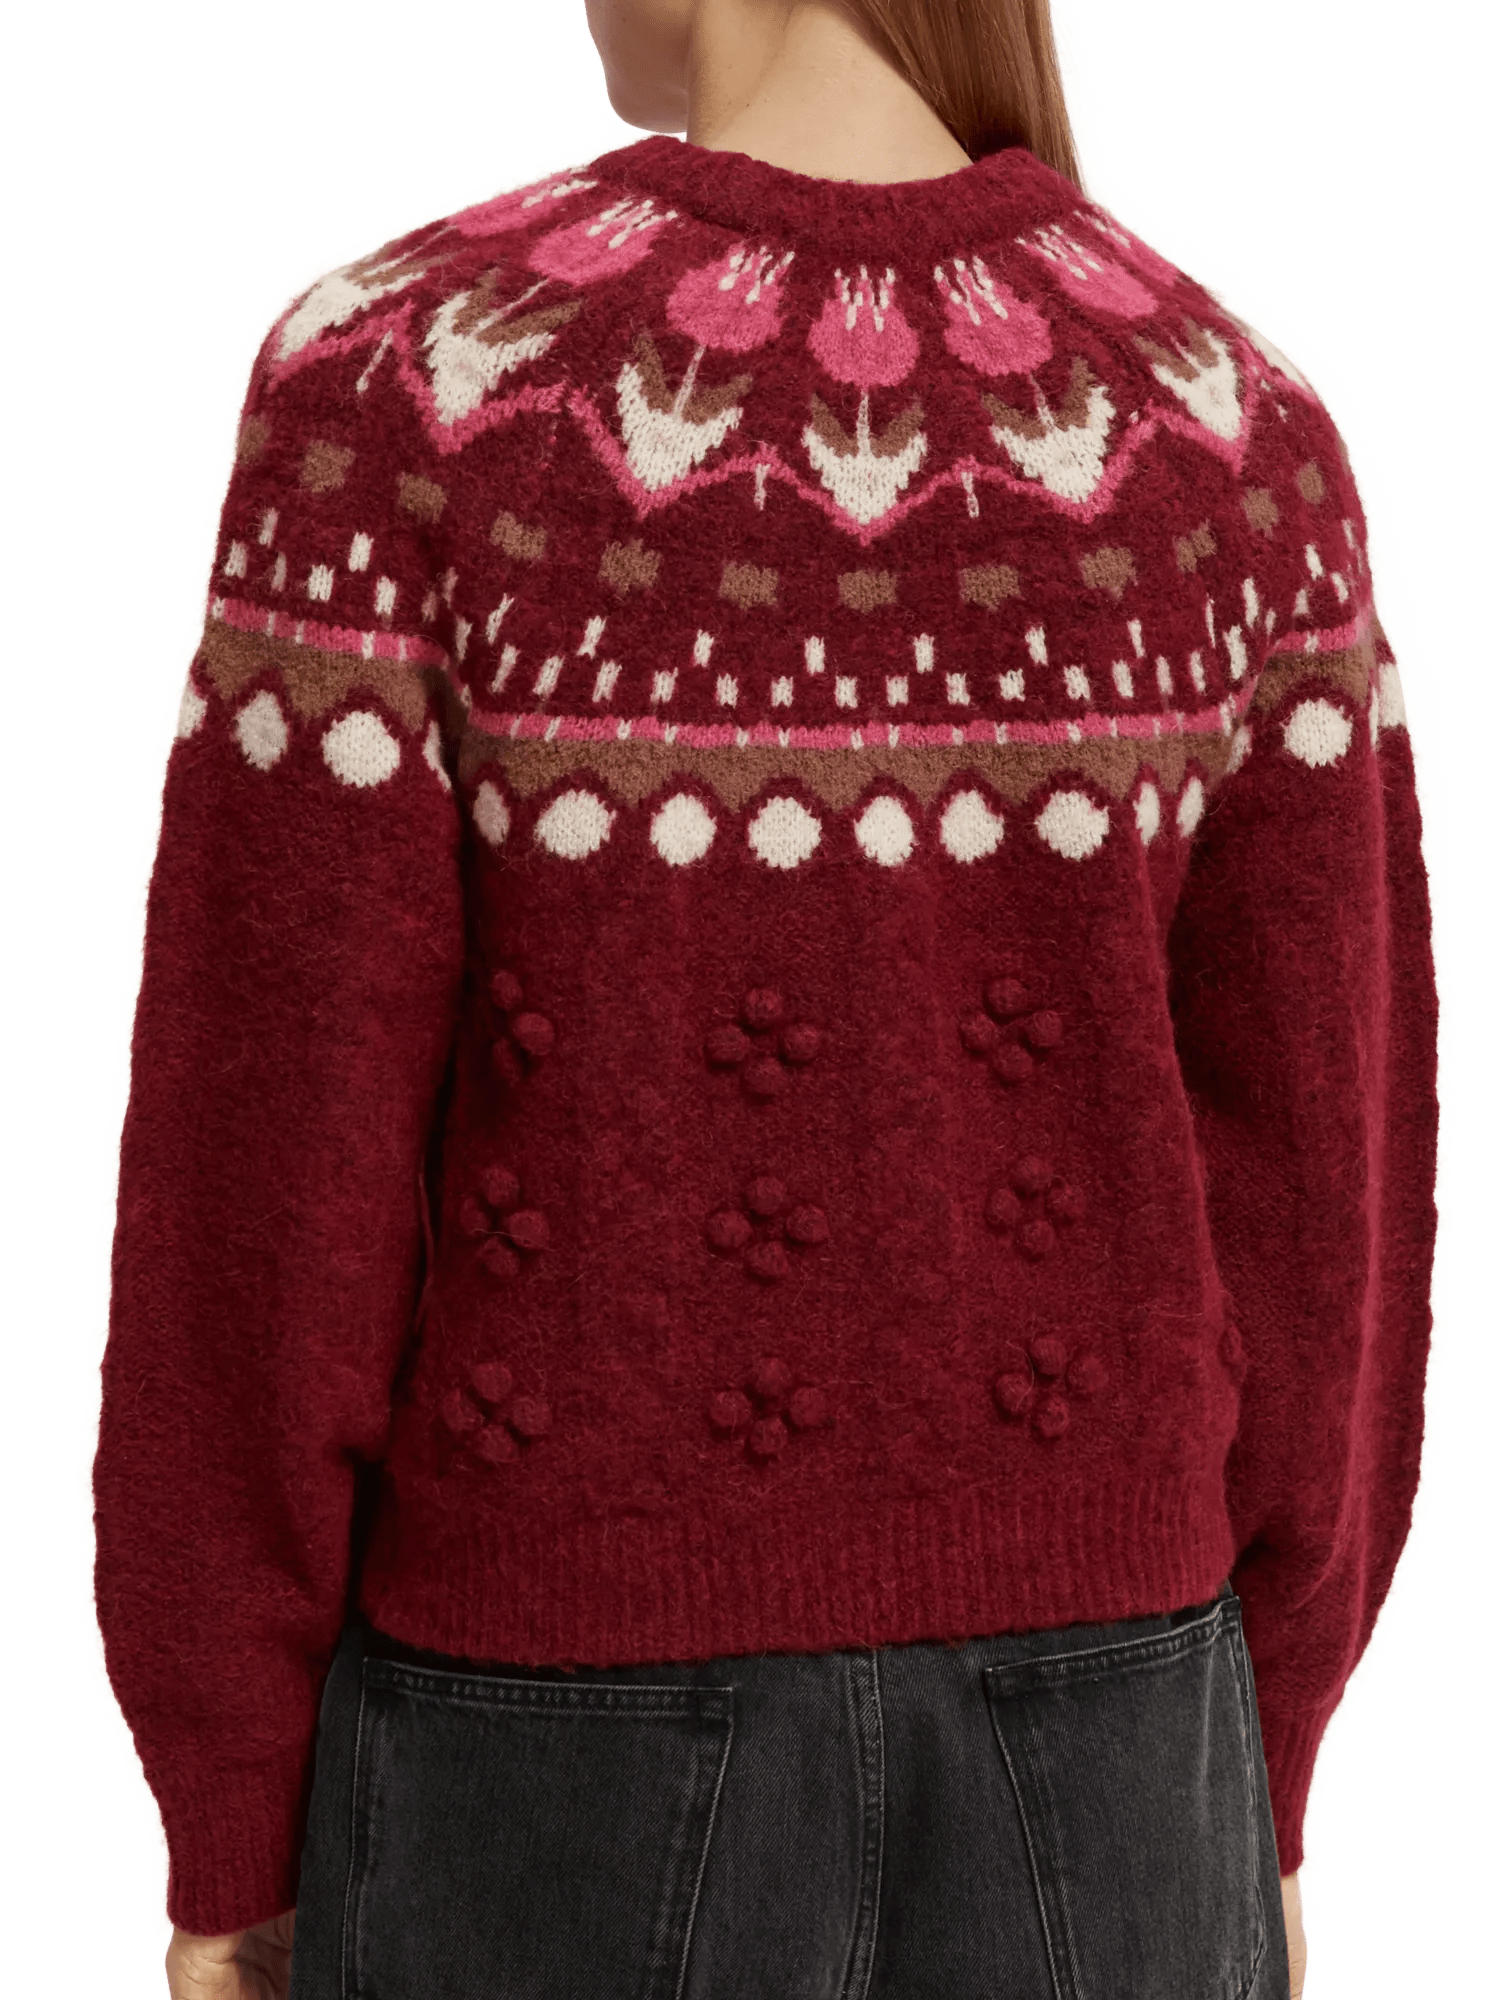 Glen Cable Knit Sweater - Whisky